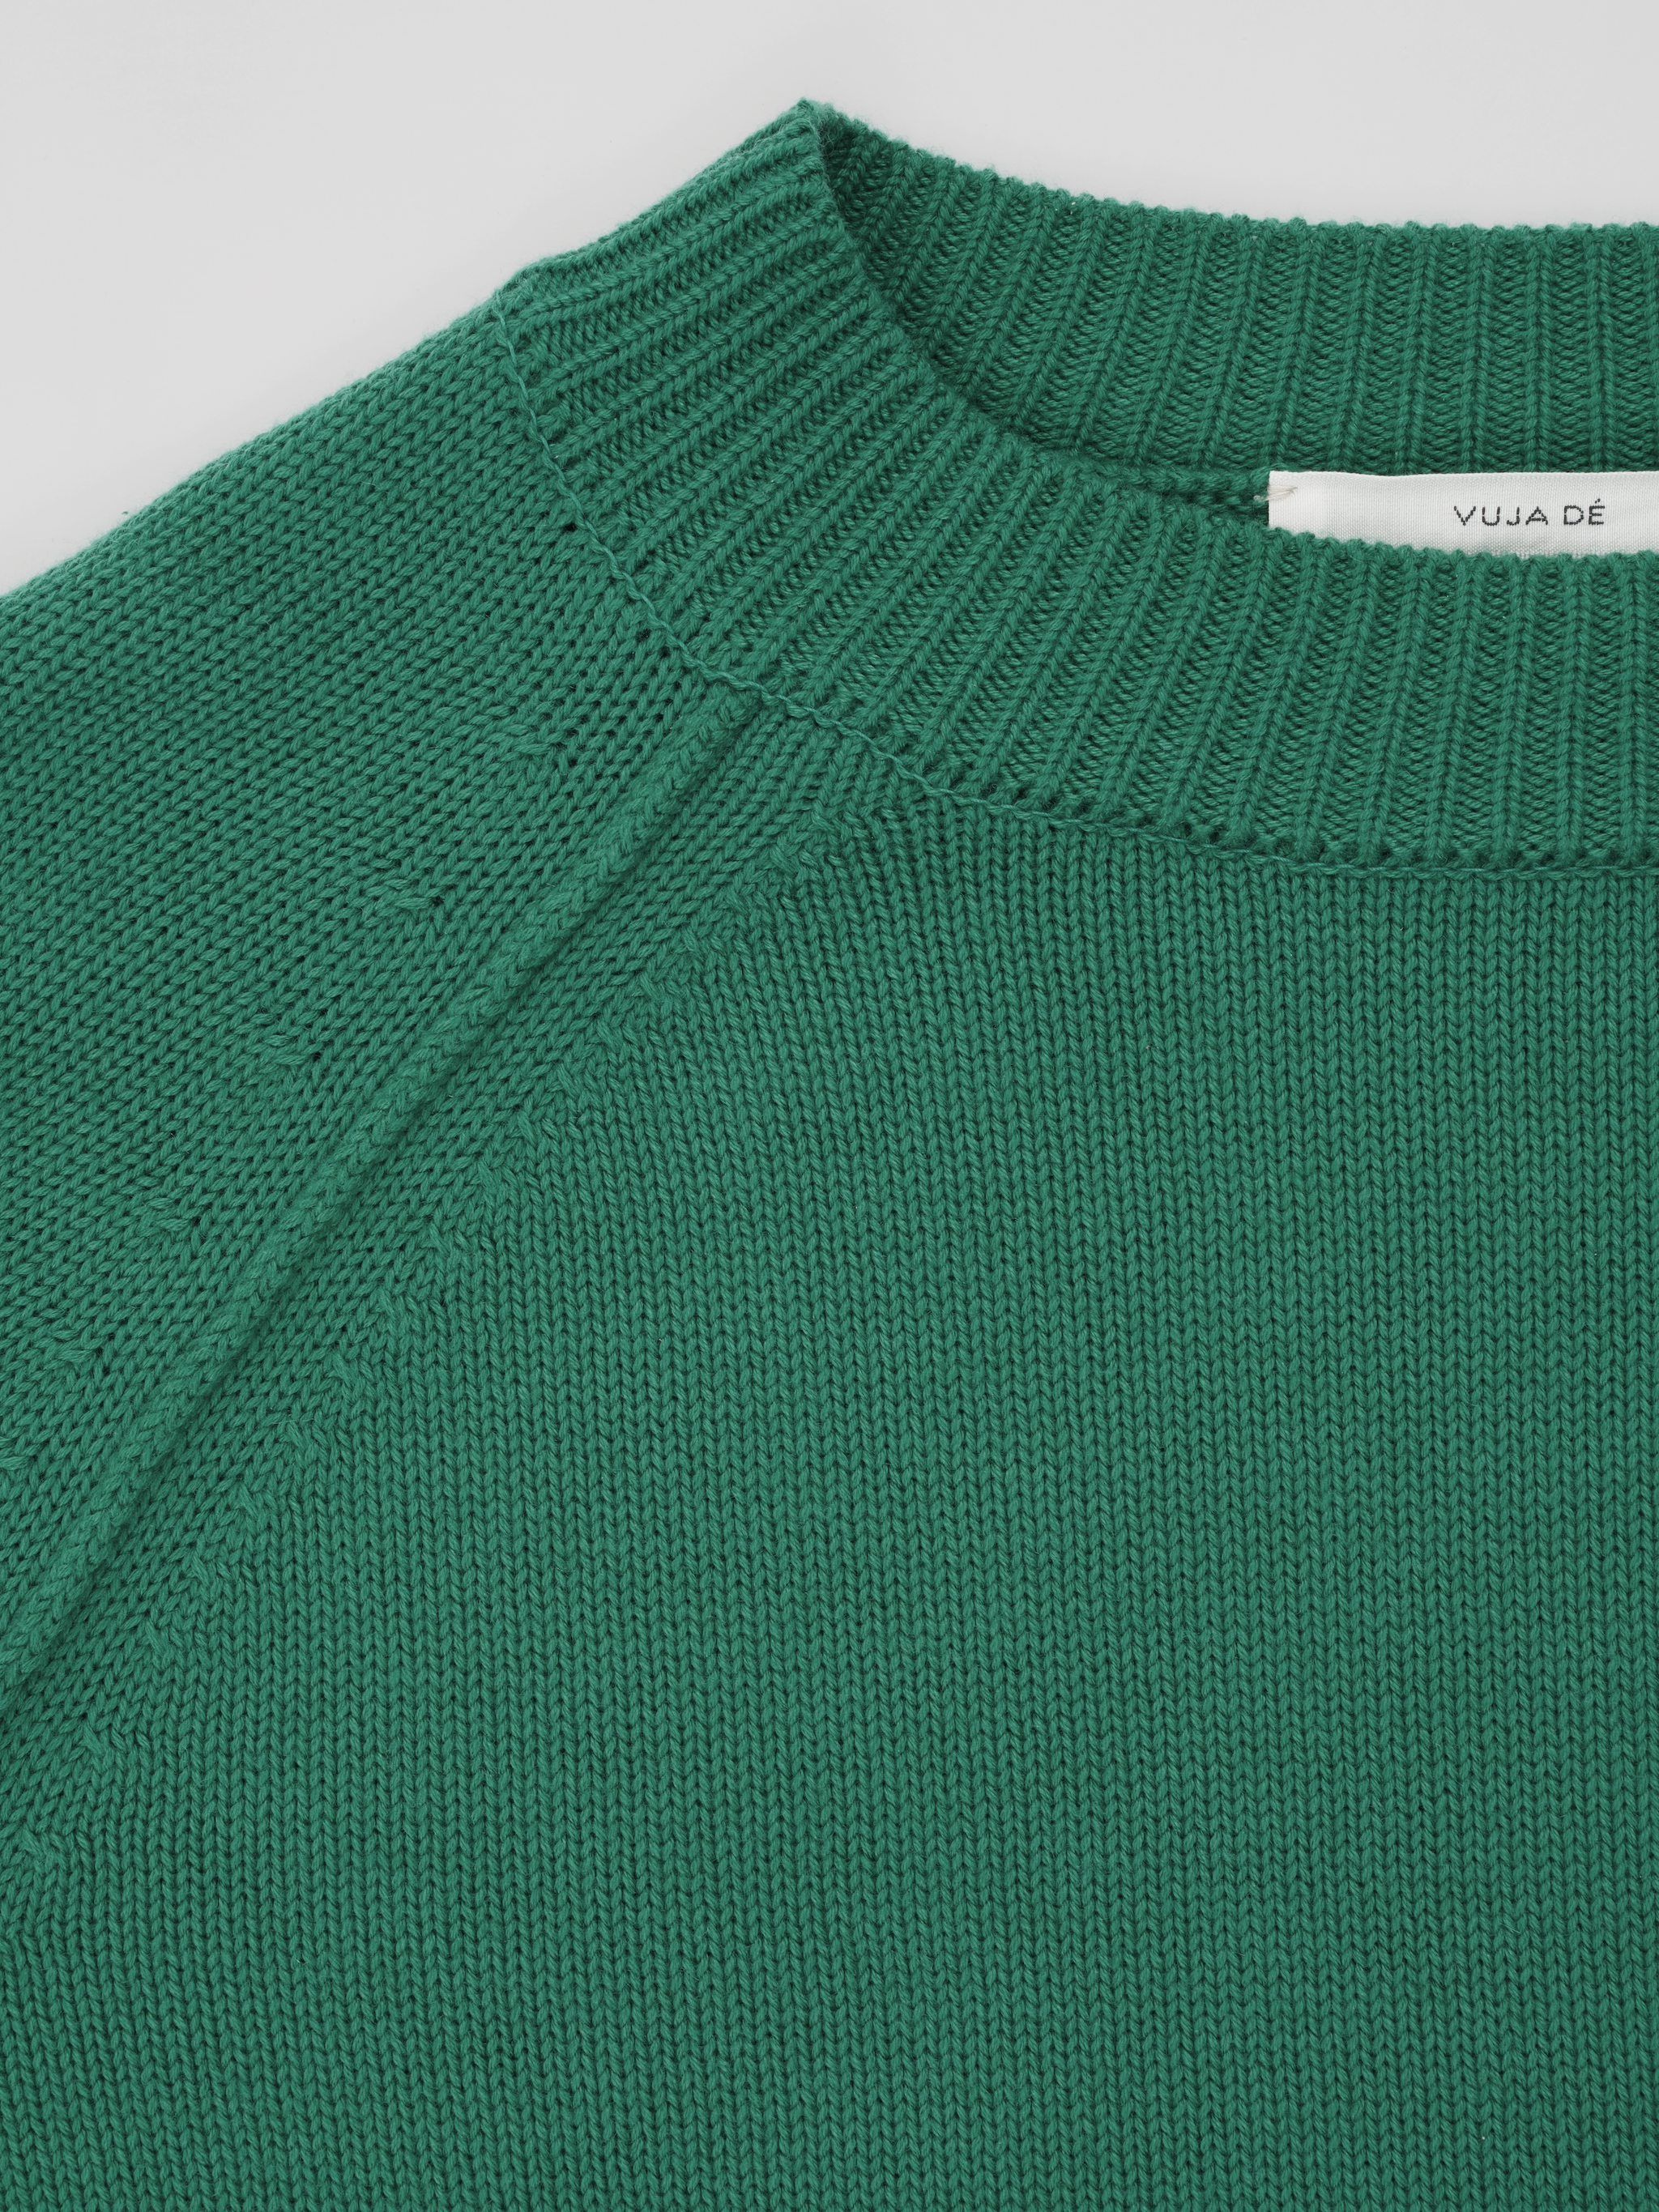 The “Piege” Cashmere Blend Sweater in Napier green